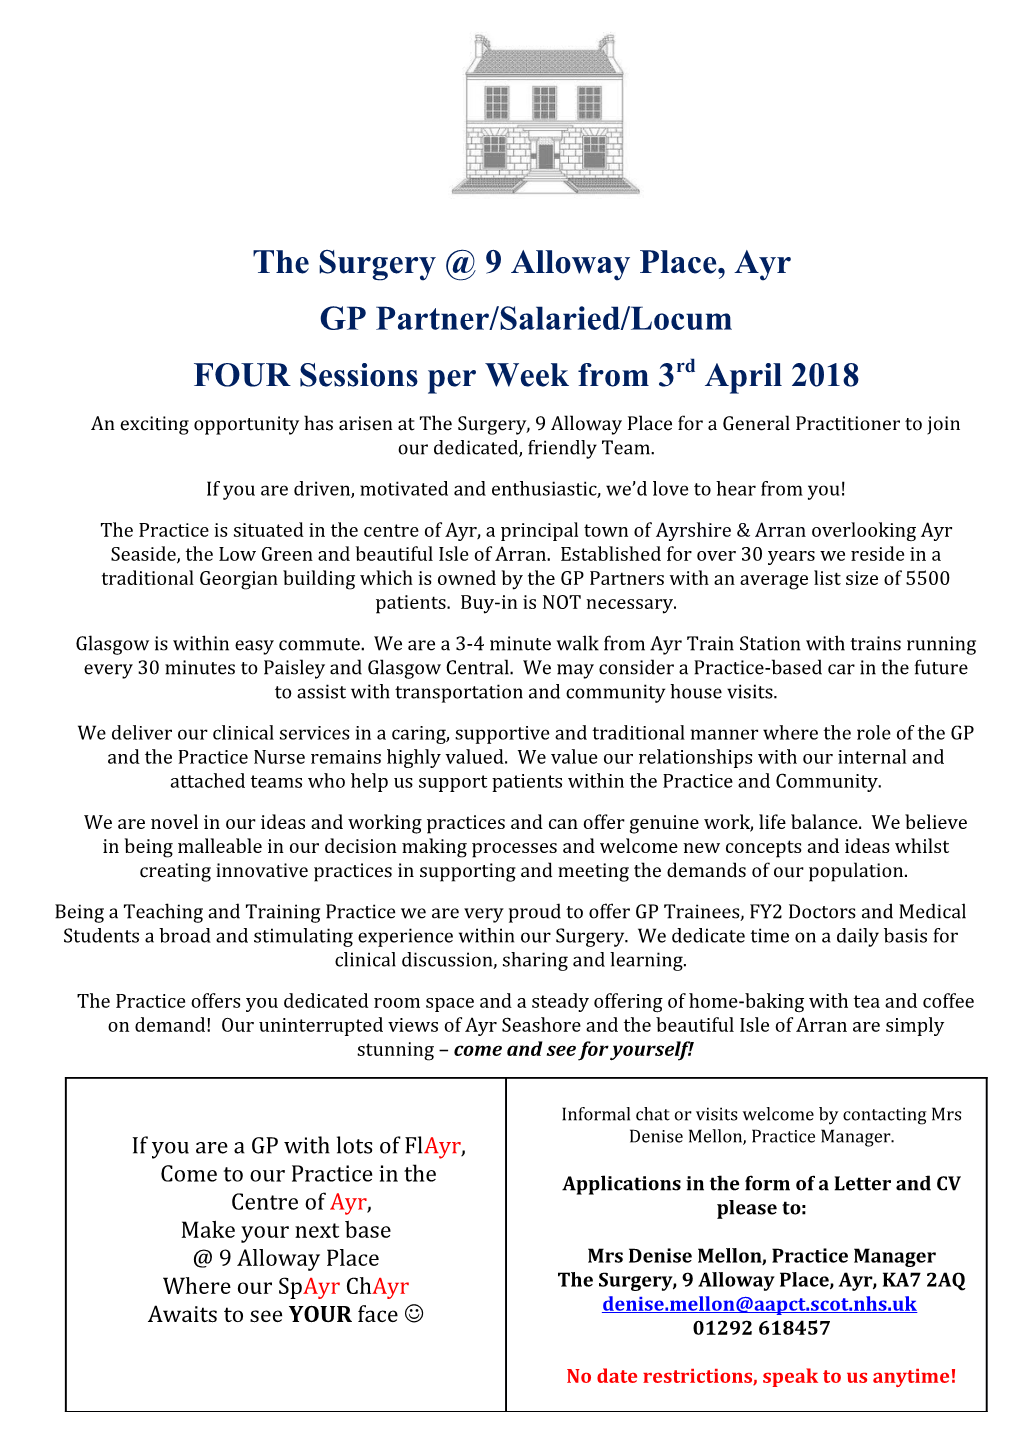 The Surgery 9 Alloway Place, Ayr